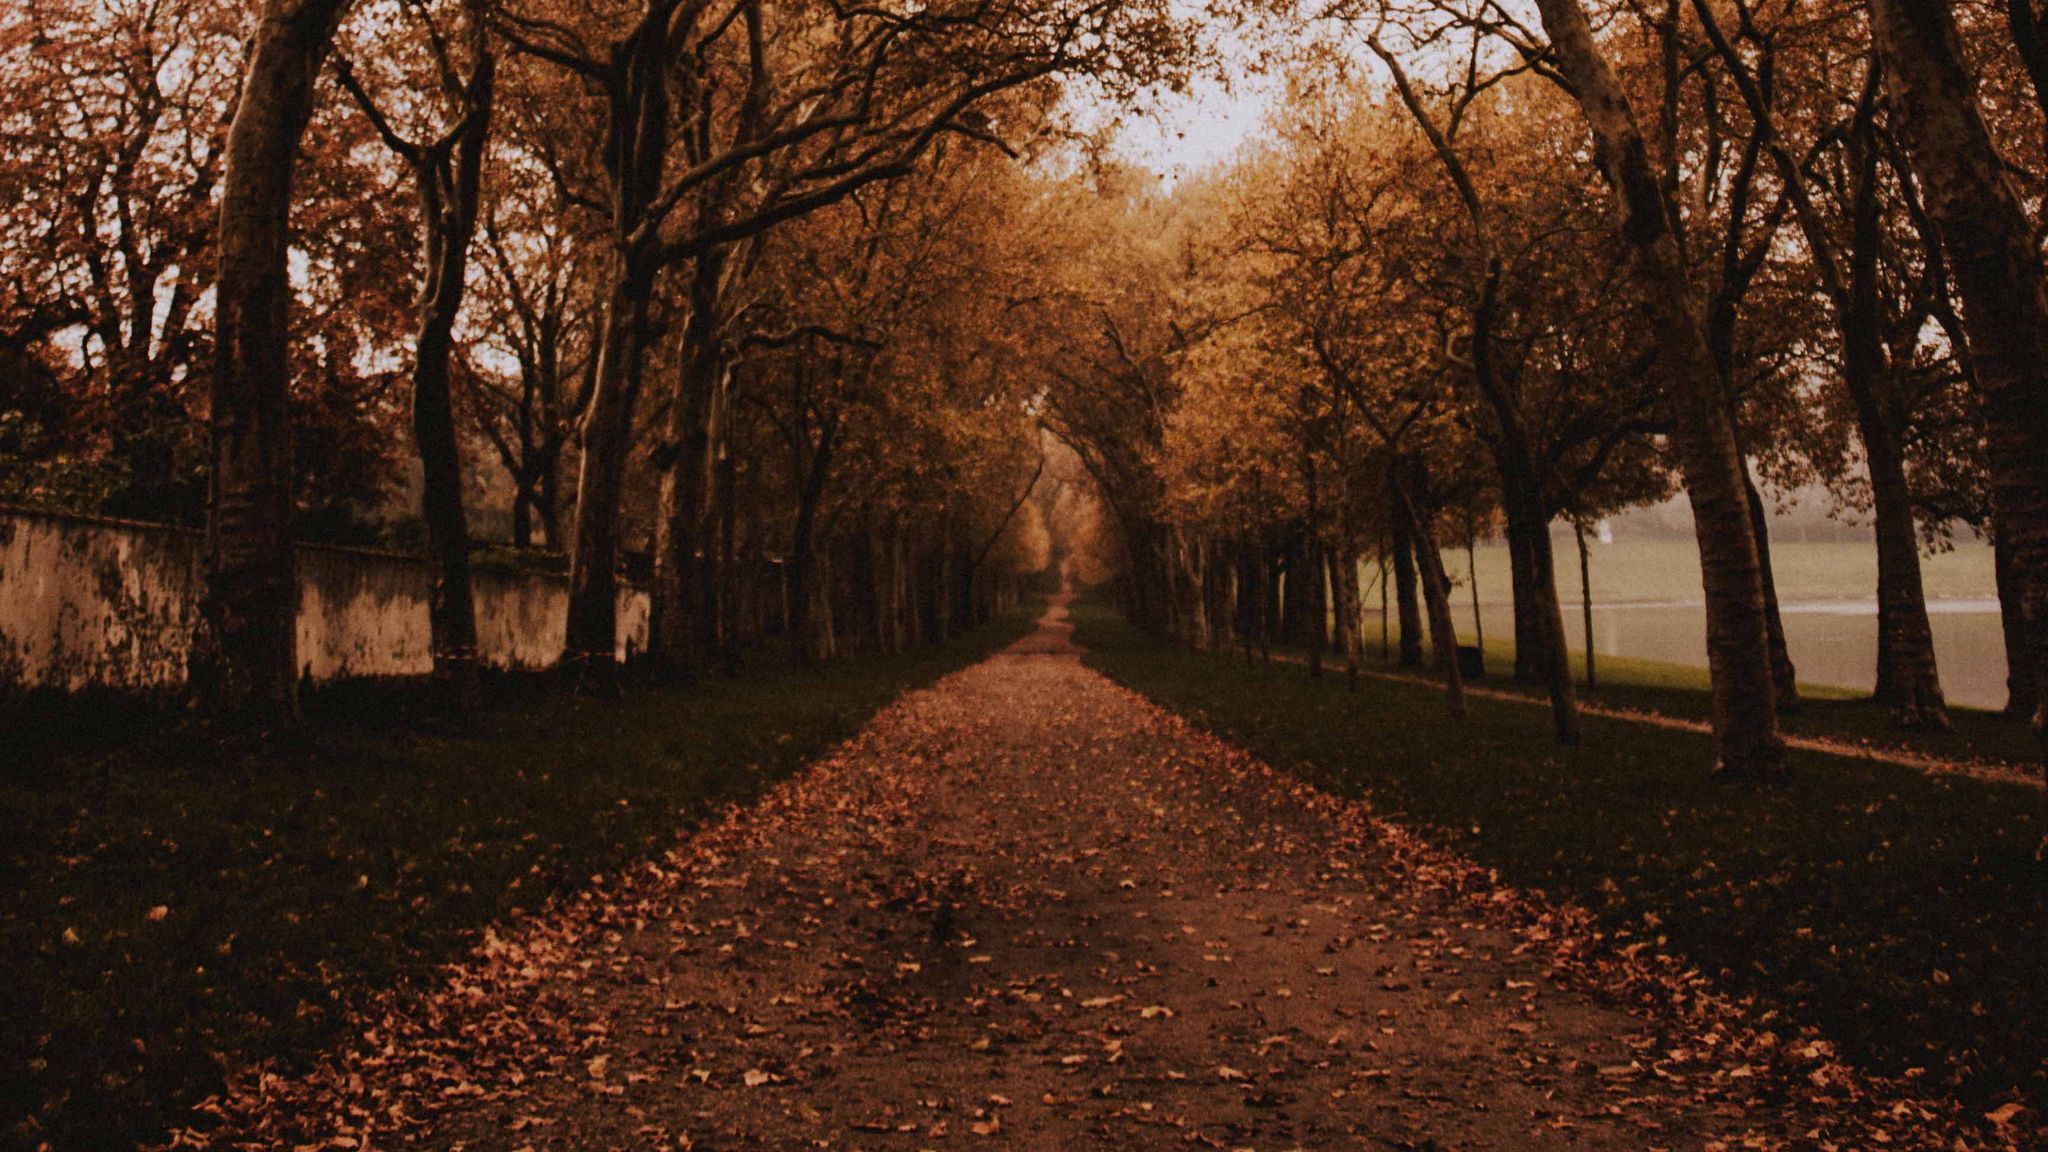 Download wallpaper 2048x1152 park, path, trees, alley, autumn ultrawide monitor HD background